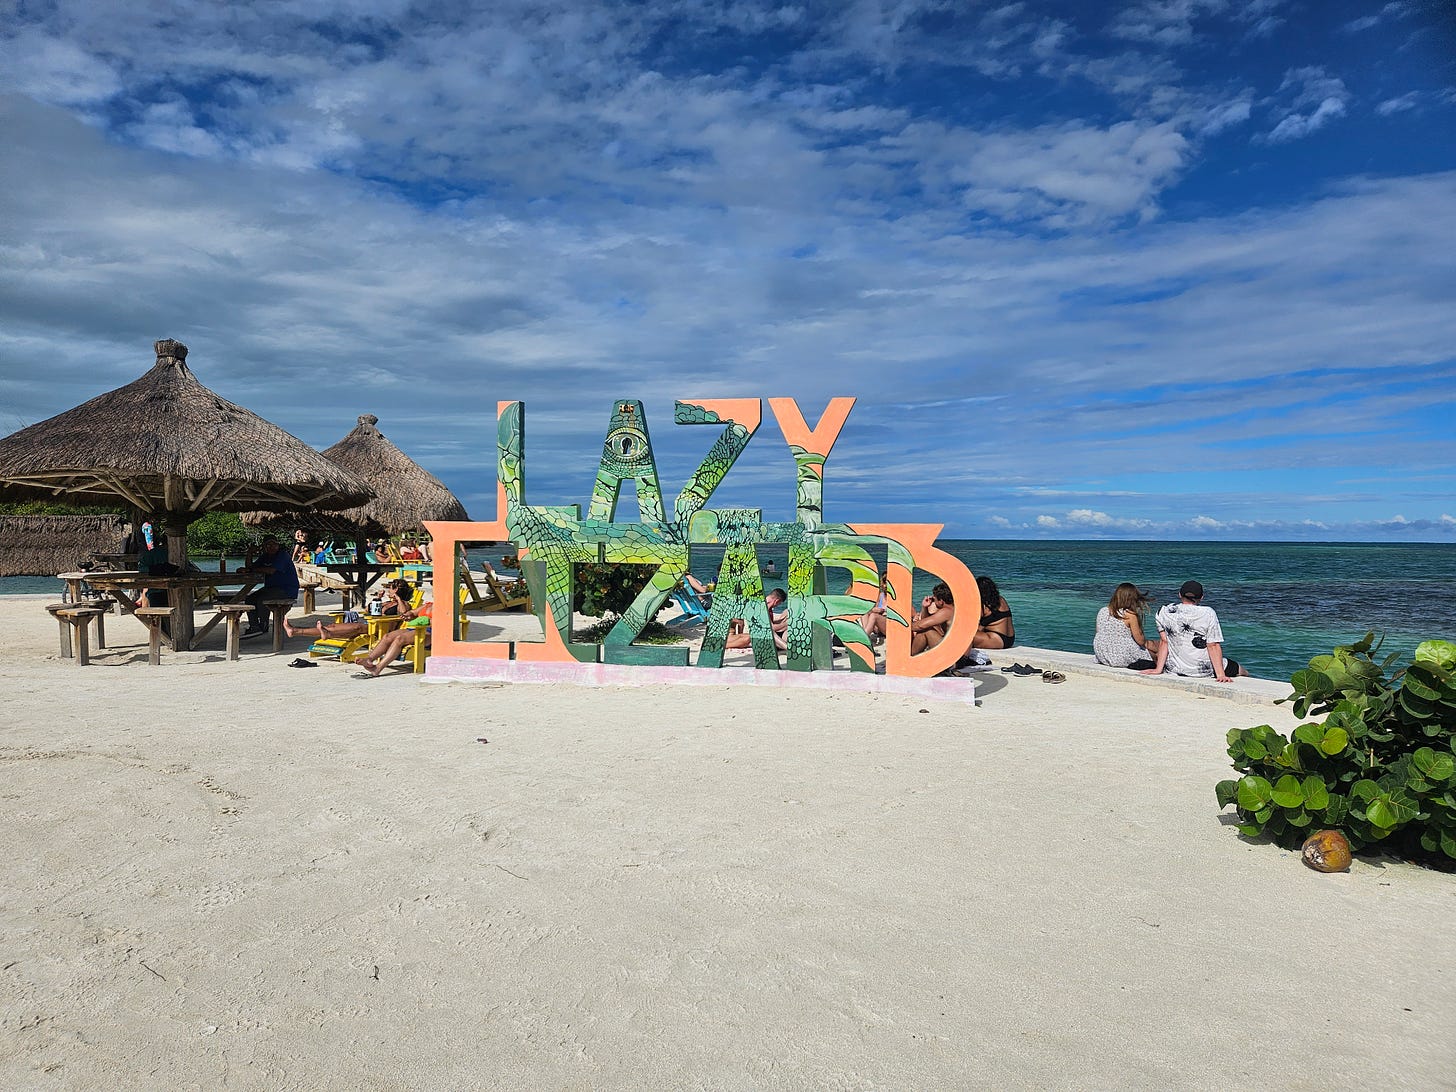 The Lazy Lizard is one of the bars on Caye Caulkner